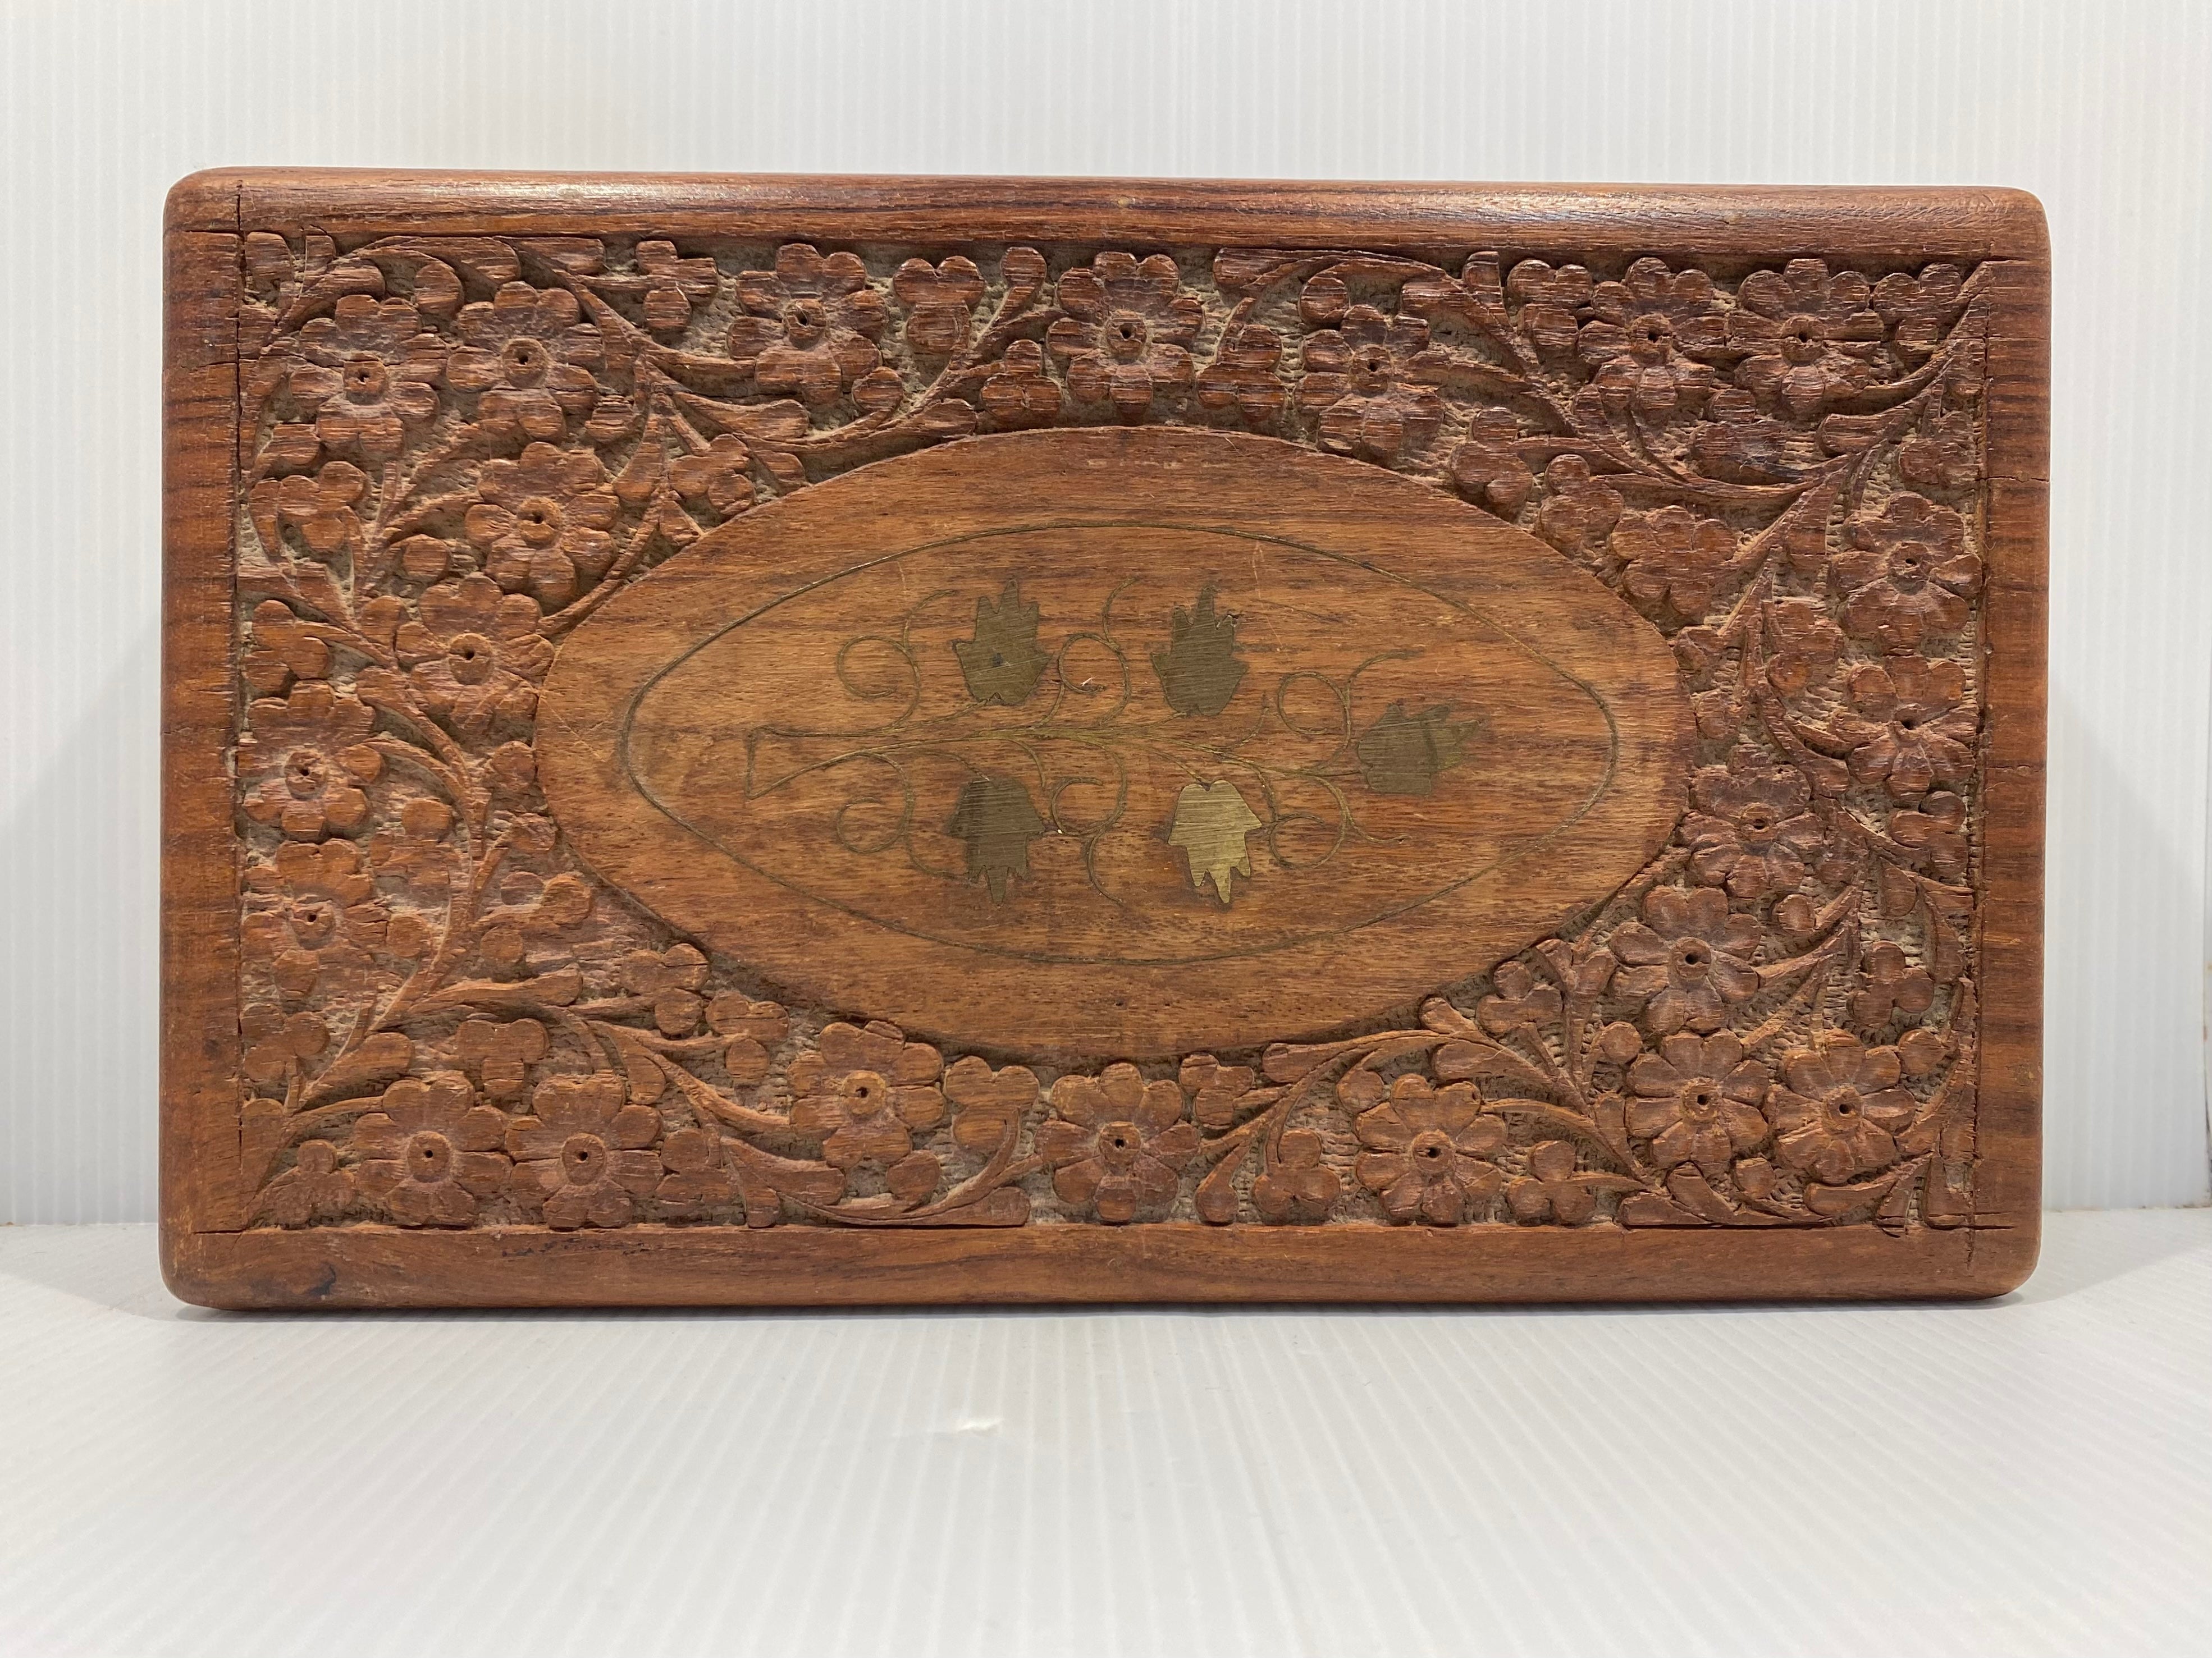 vintage carved wooden box with bronze inlays